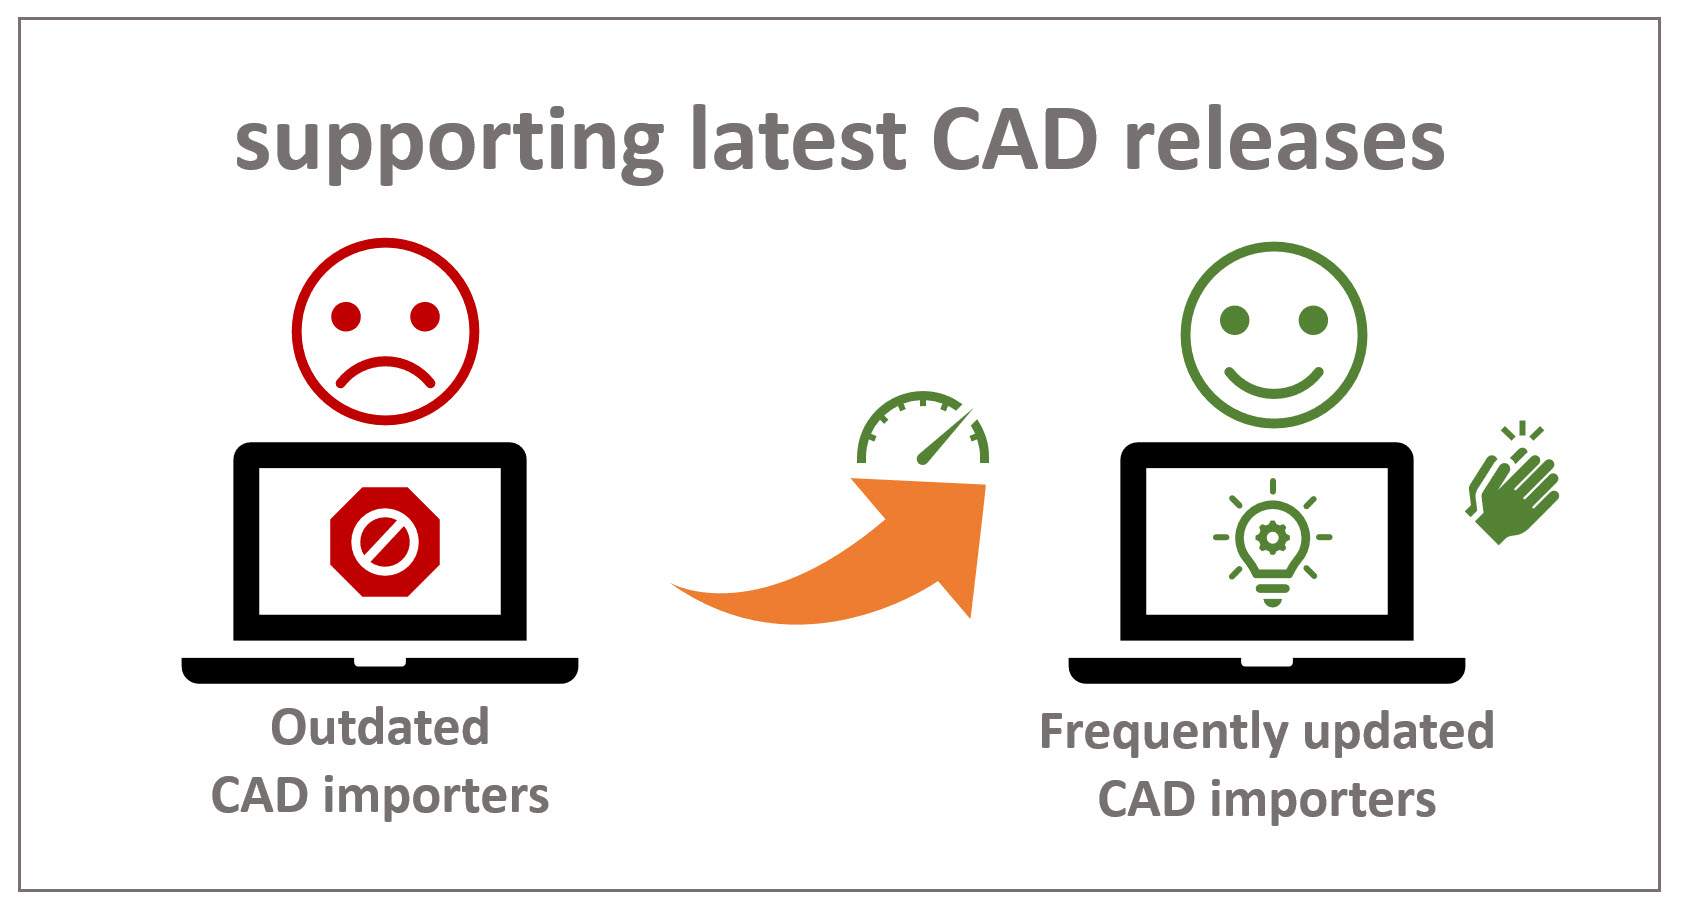 it is mandatory to support latest CAD releases